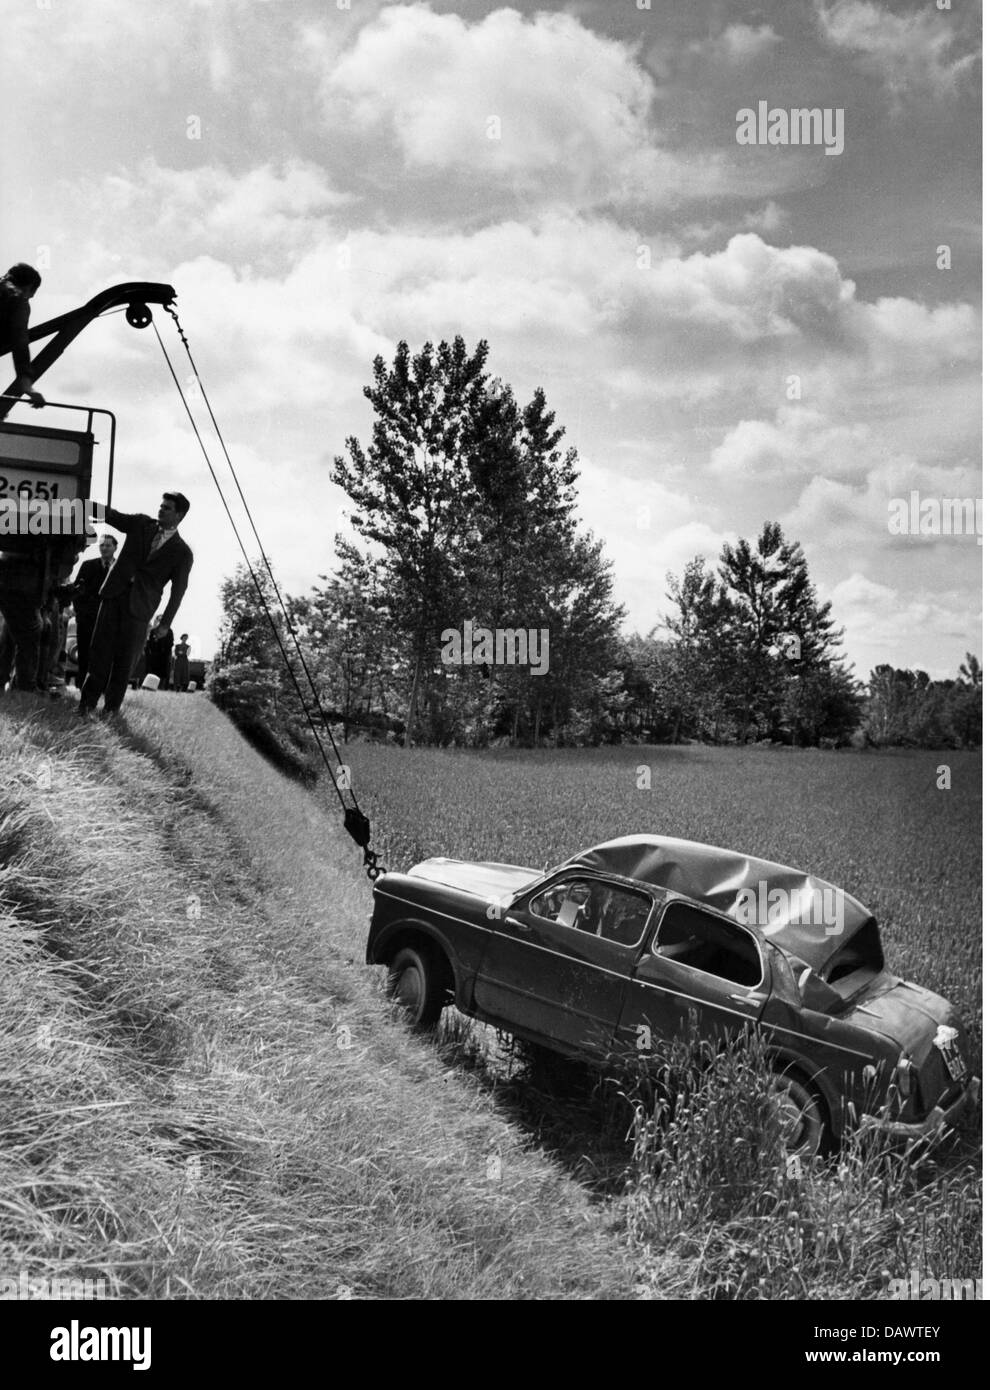 transport / transportation, cars, car crashes, accident, recovery of a car, circa 1960, Additional-Rights-Clearences-Not Available Stock Photo